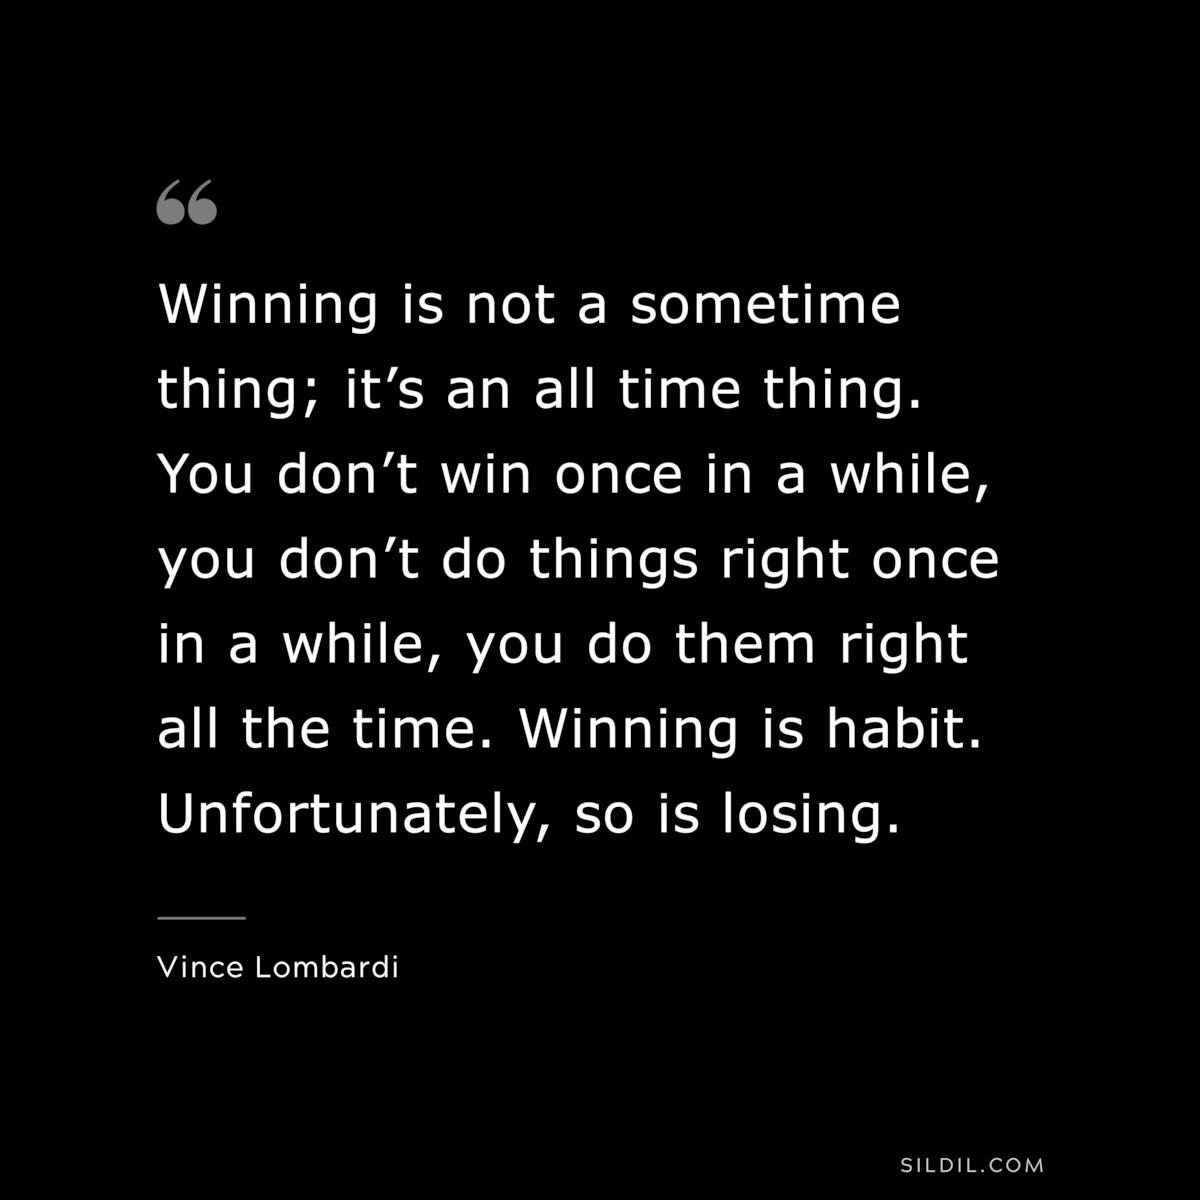 Winning is not a sometime thing; it’s an all time thing. You don’t win once in a while, you don’t do things right once in a while, you do them right all the time. Winning is habit. Unfortunately, so is losing. ― Vince Lombardi